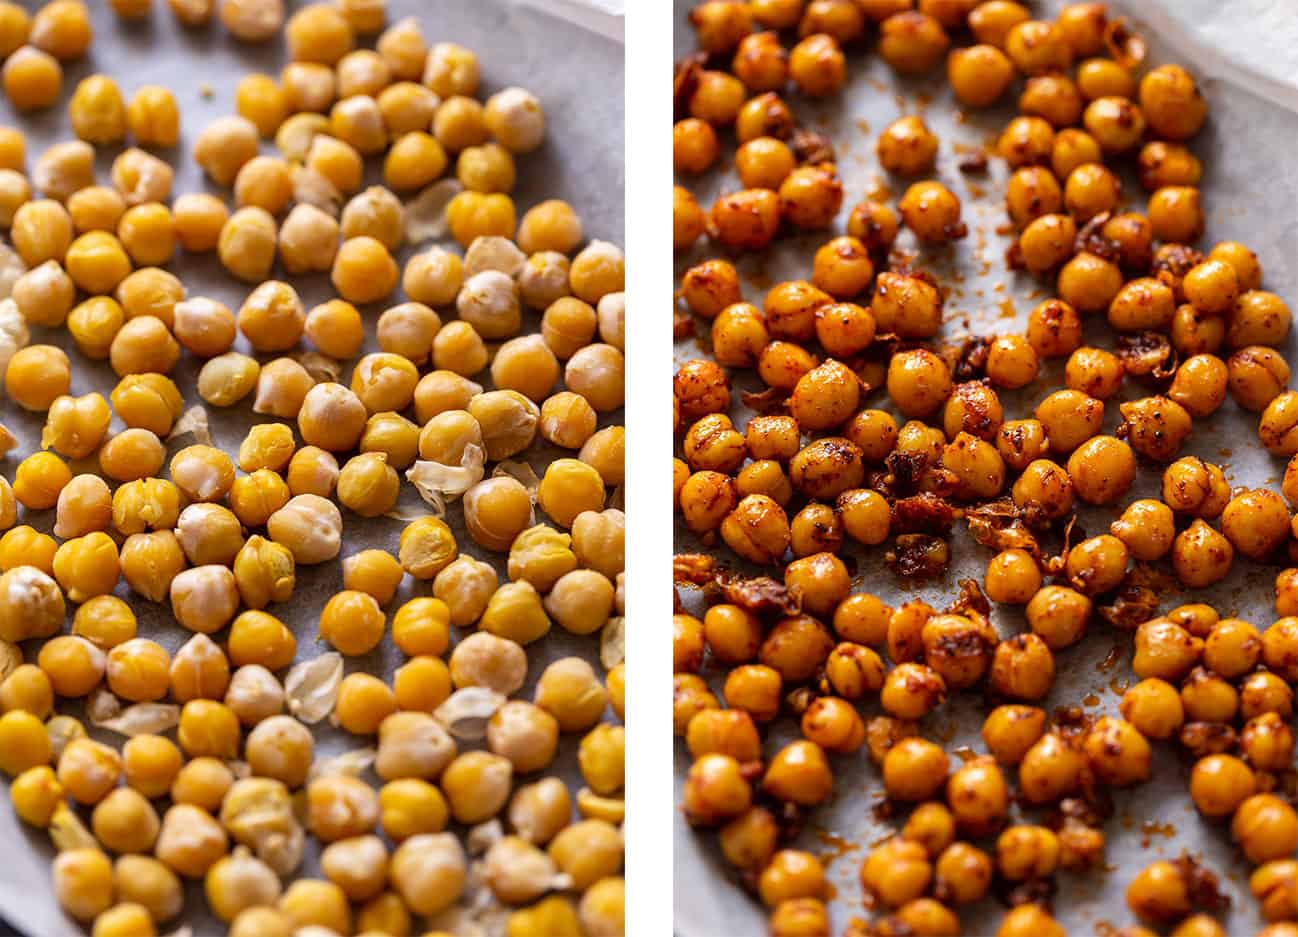 Left: Cooked chickpeas, dried in the oven. Right: Chickpeas seasoned with olive oil, garlic, and spices.